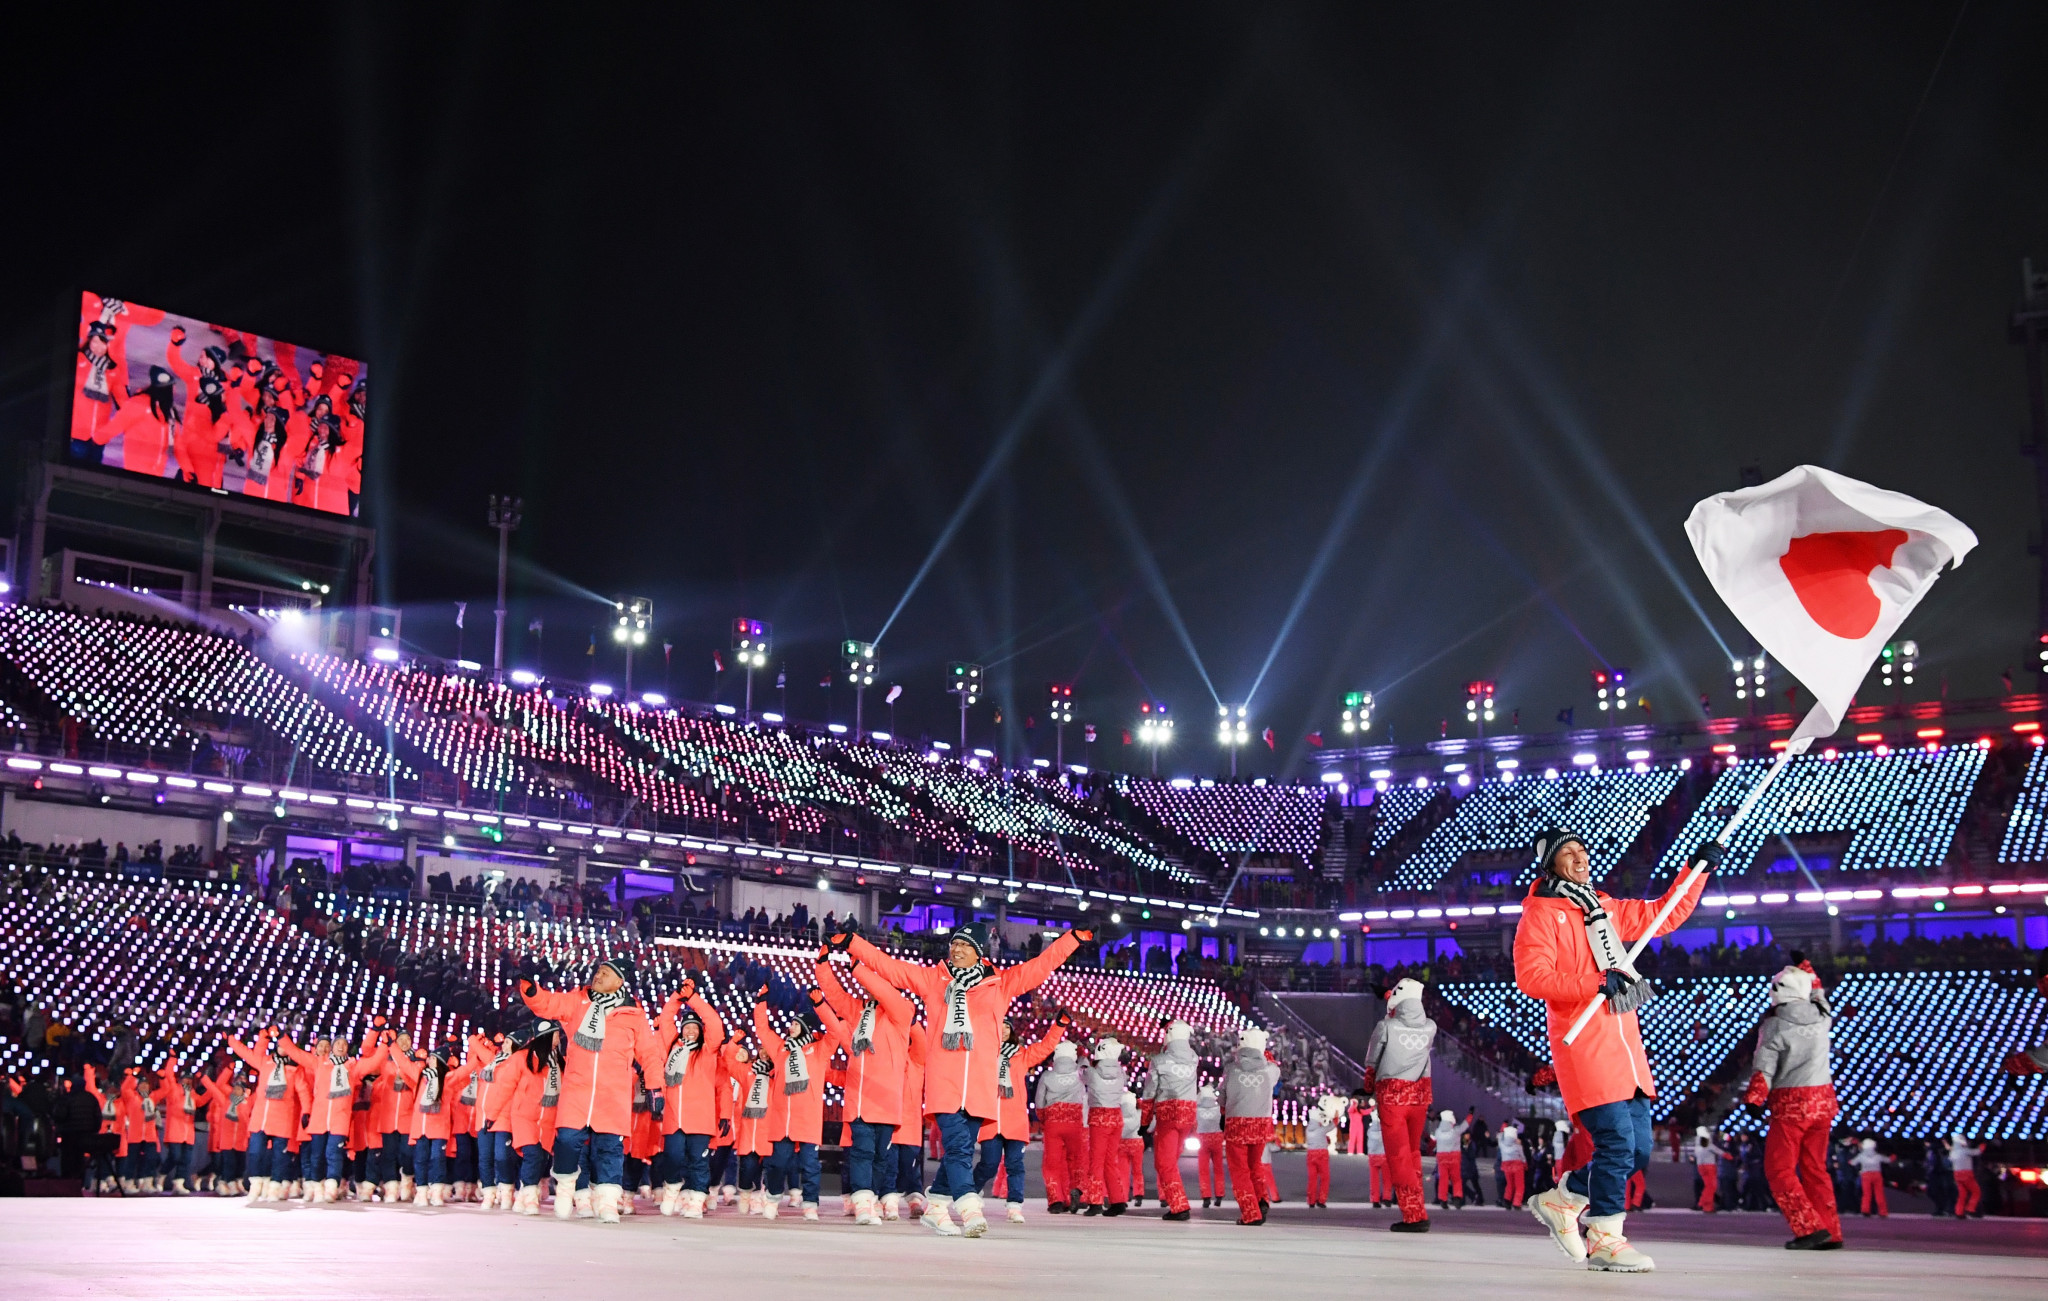 Josh Cooper Ramo made the remarks as Japan was introduced at the Opening Ceremony ©Getty Images